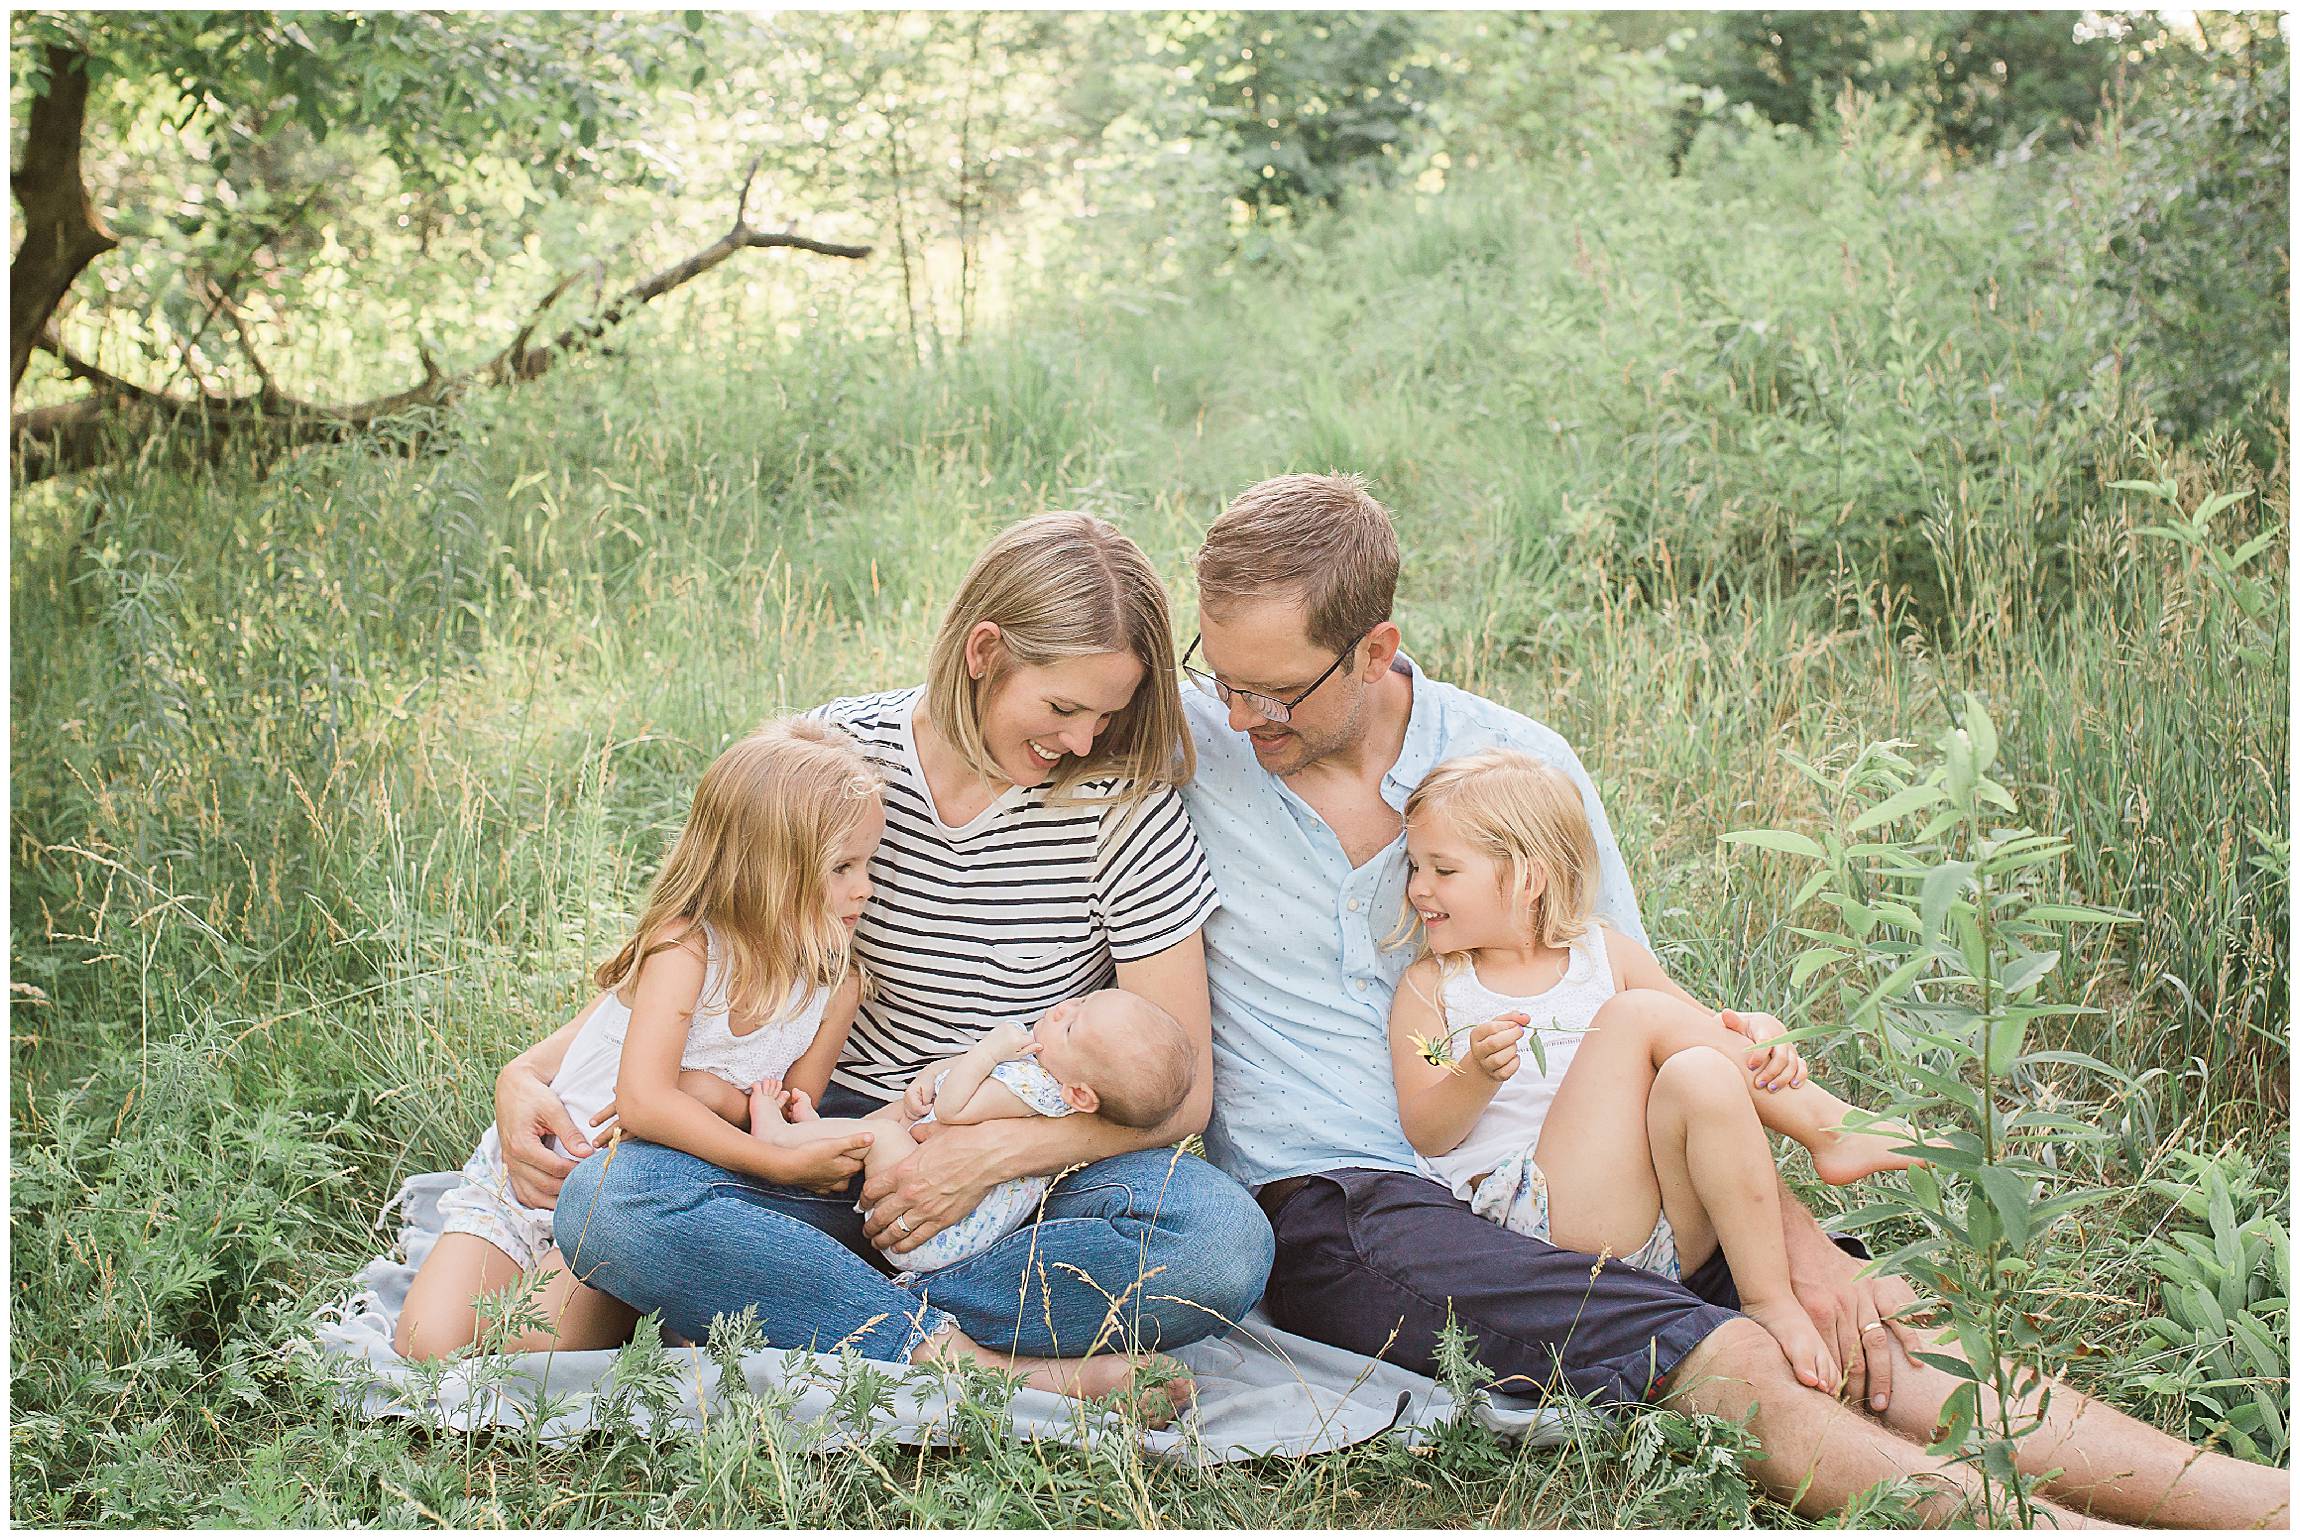 Light and Airy Family Photograph in Fields